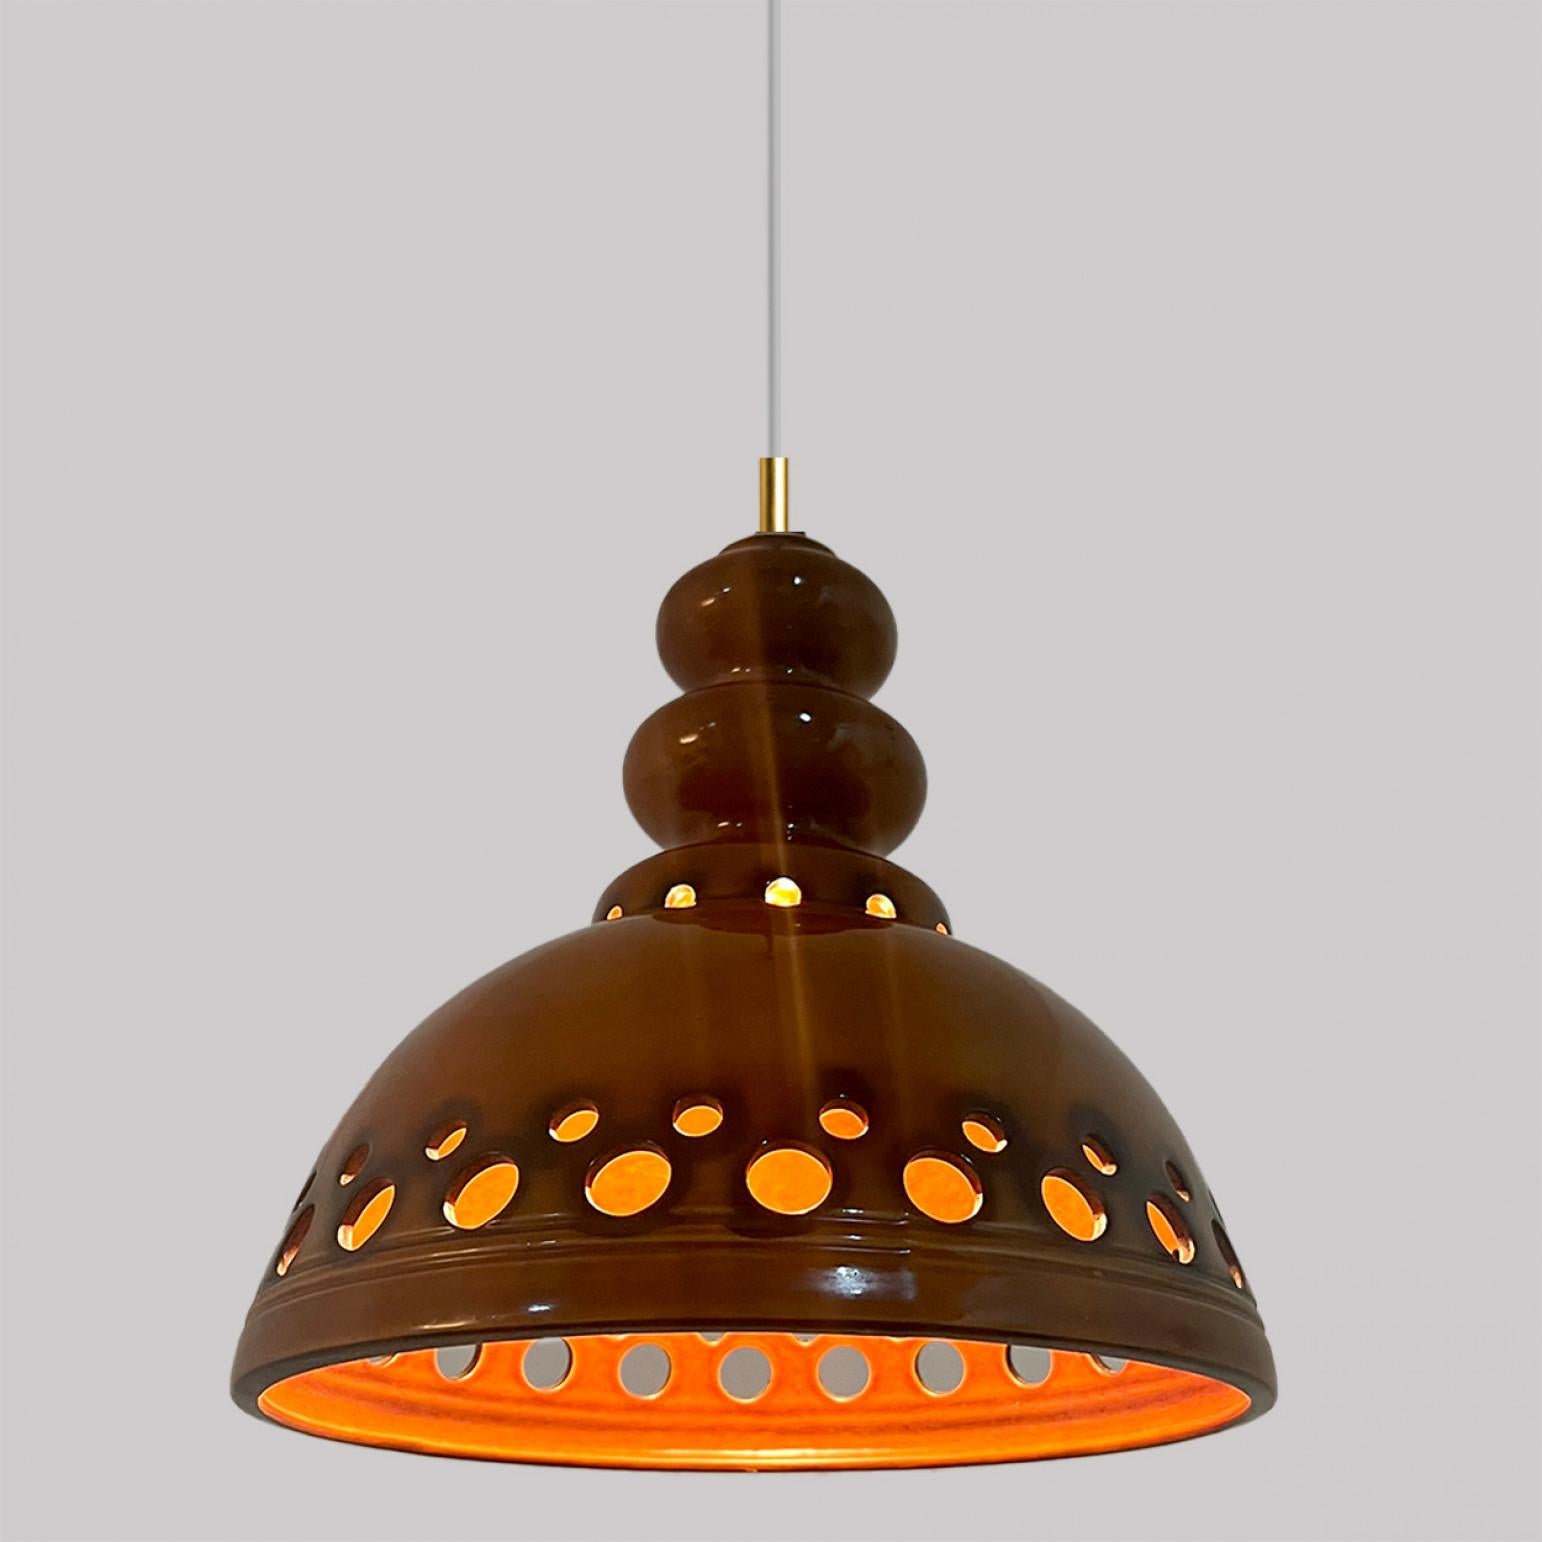 Set of Mixed Brown Glazed Ceramic Pendant Lights, Germany, 1970s For Sale 6